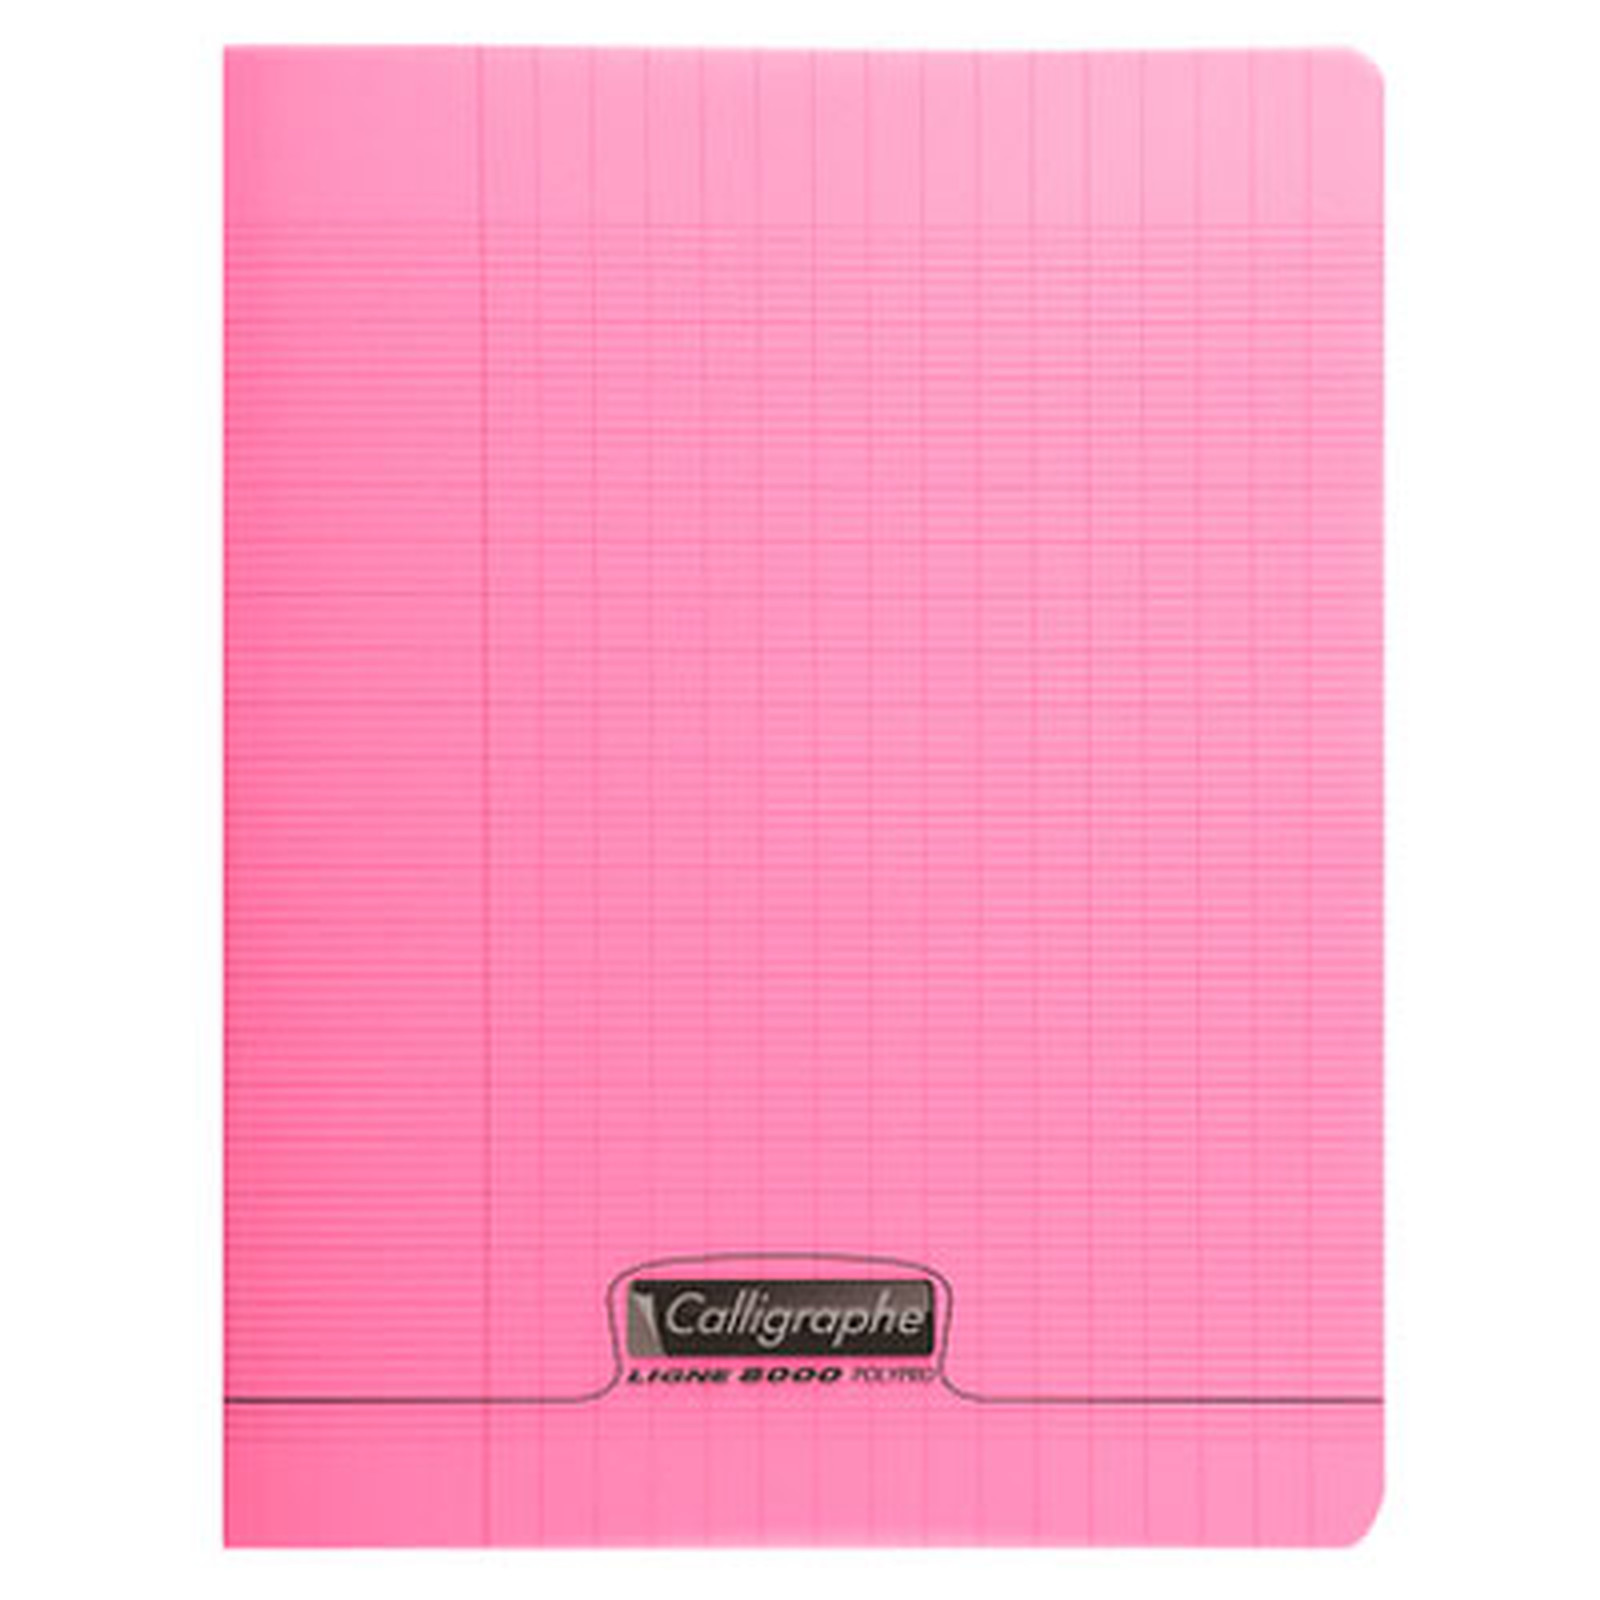 Calligraphe 8000 Polypro Cahier 96 pages 24 x 32 cm seyes grands carreaux Rose - Cahier Calligraphe